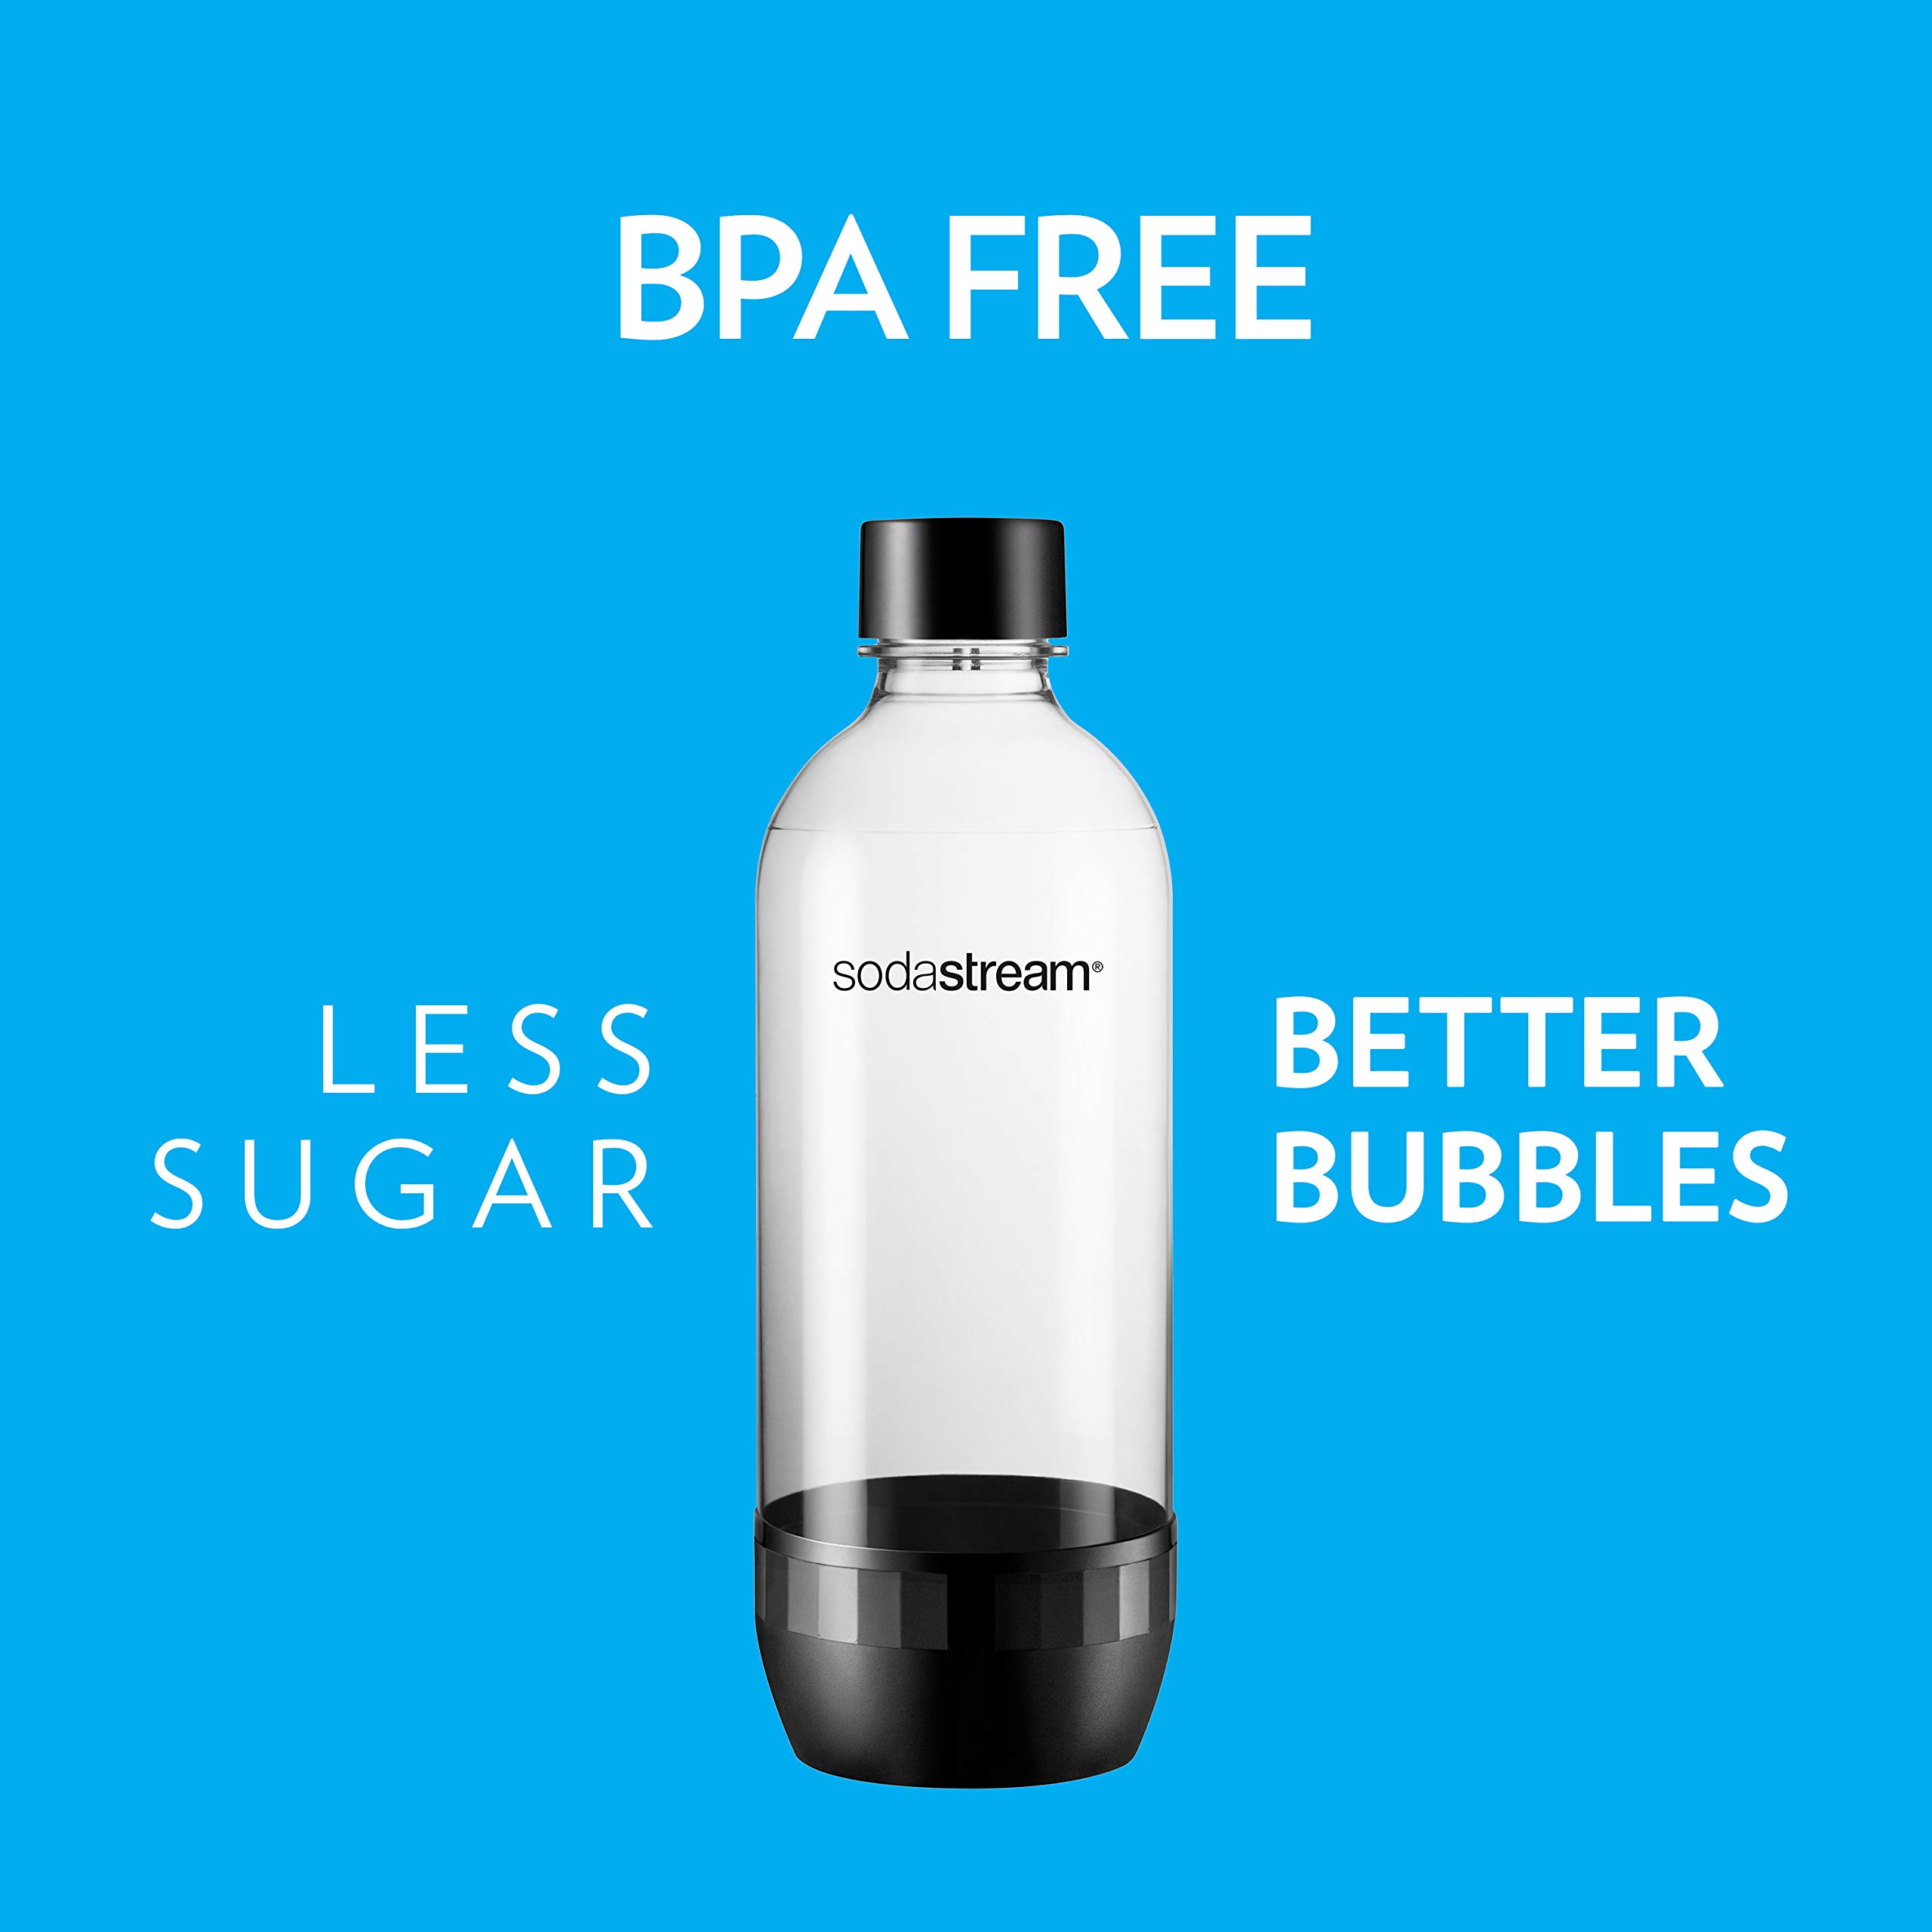 SodaStream CLASSIC DWS Carbonating Bottle BLACK (twinpack), 1L Pack Of 2